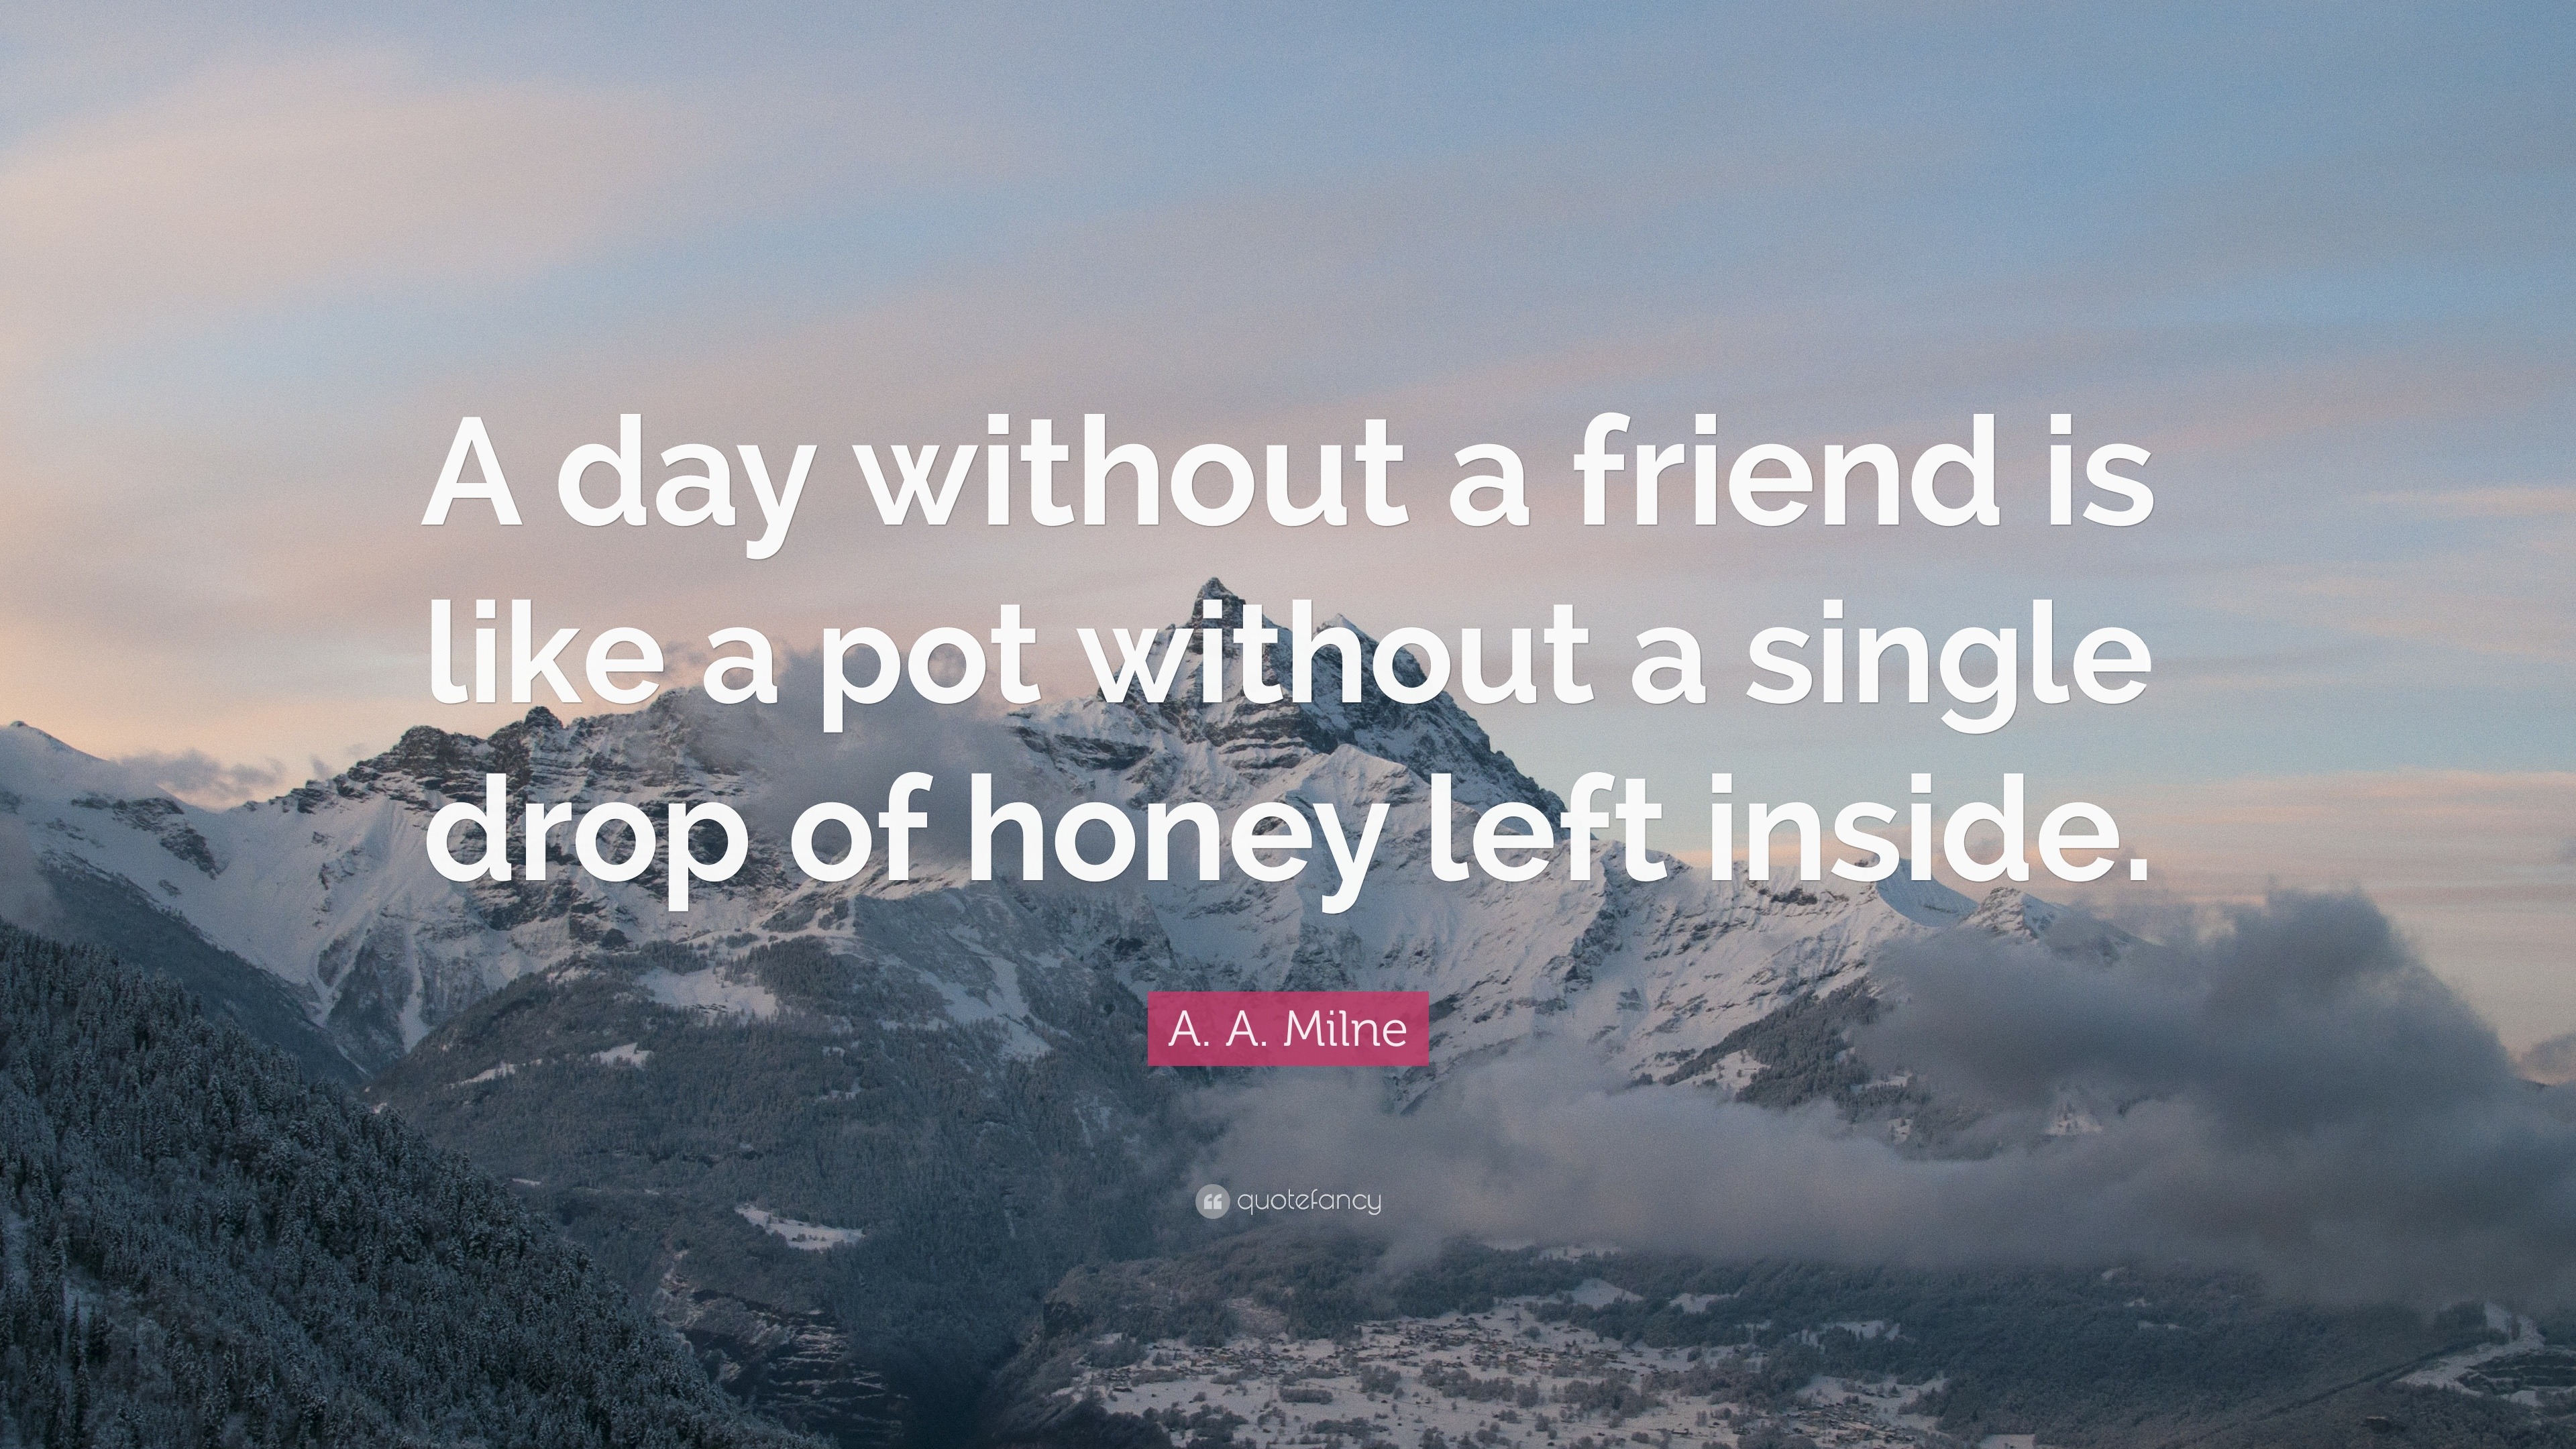 307034 A A Milne Quote A day without a friend is like a pot without a